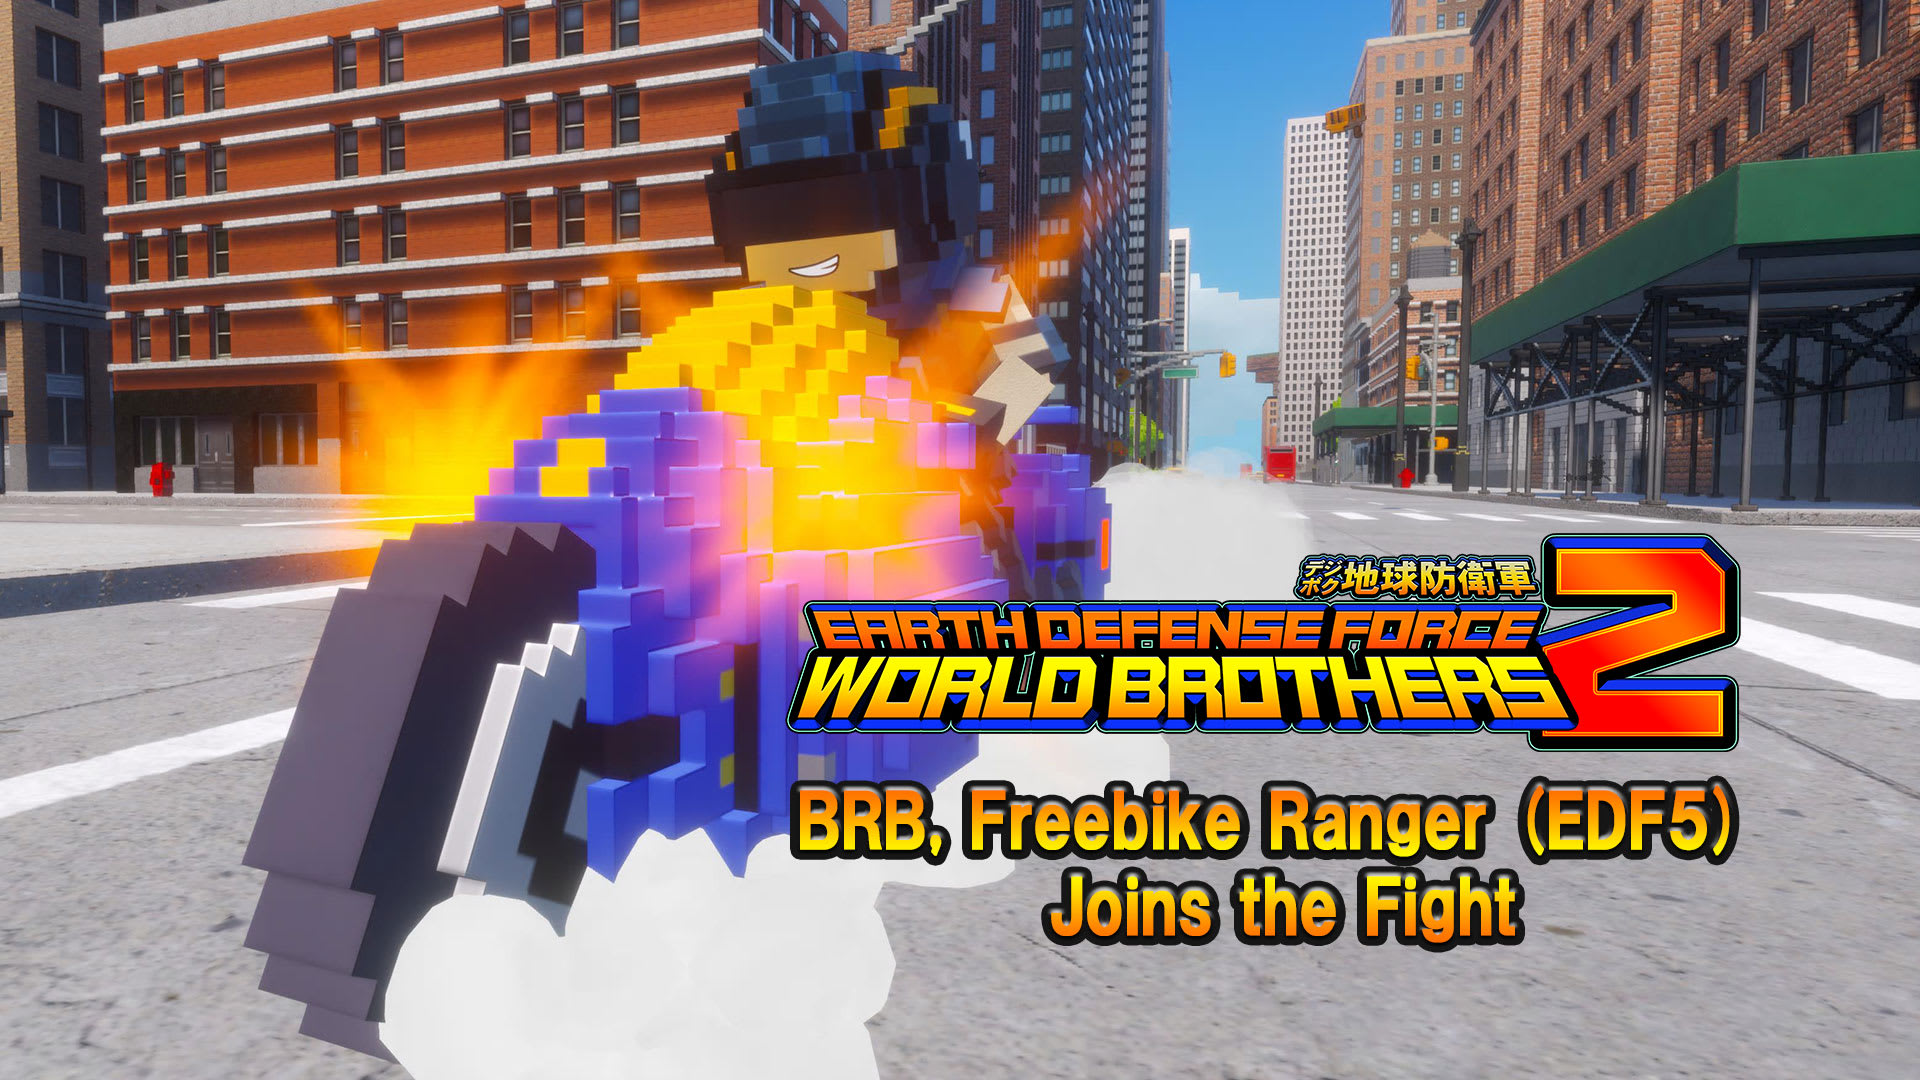 "Additional Character" BRB, Freebike Ranger (EDF5) Joins the Fight